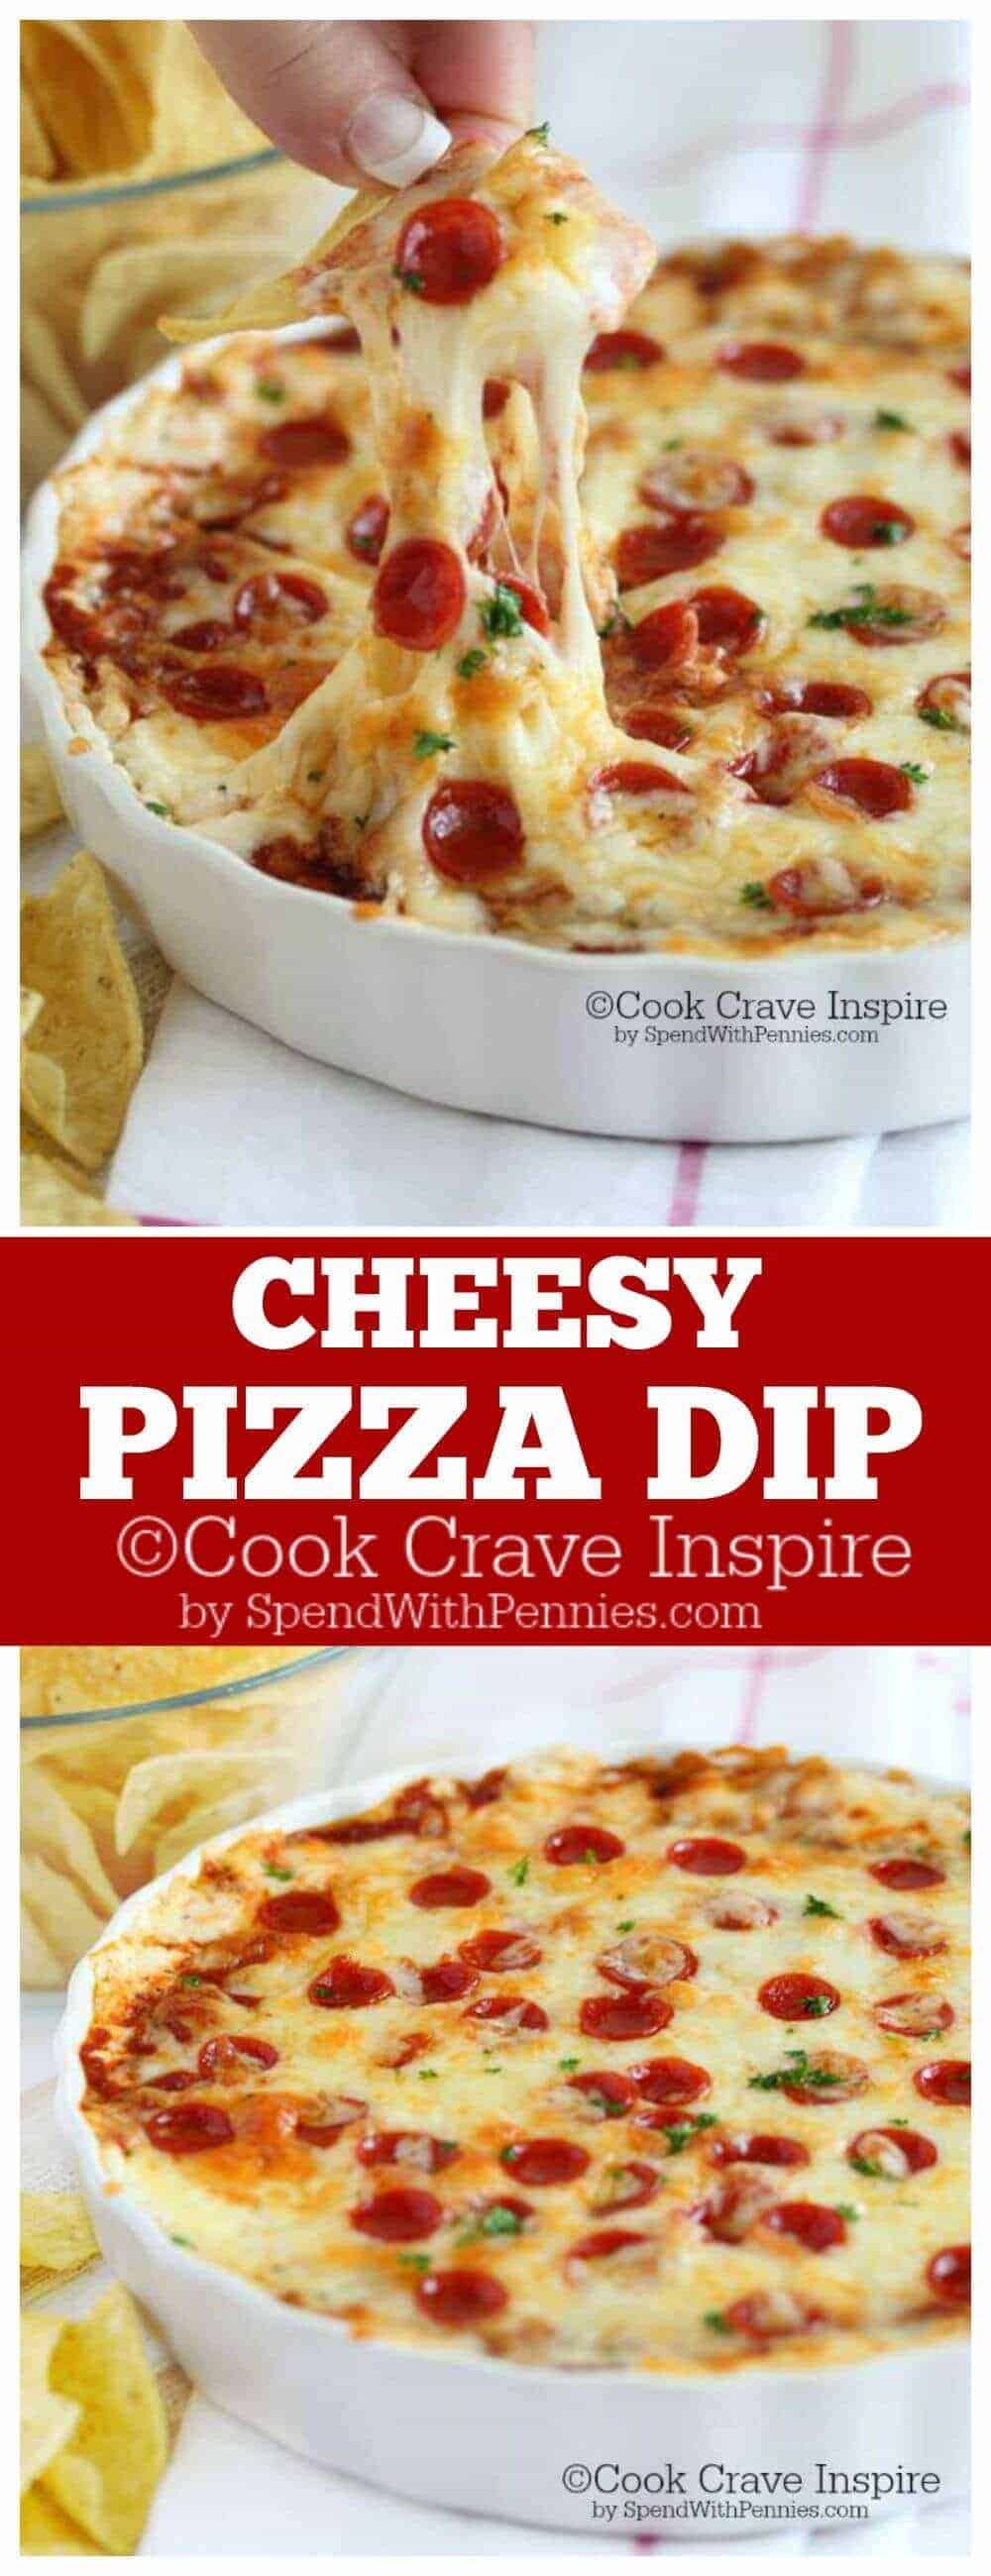 Cheesy Pizza Dip being scooped and in a pan with a title